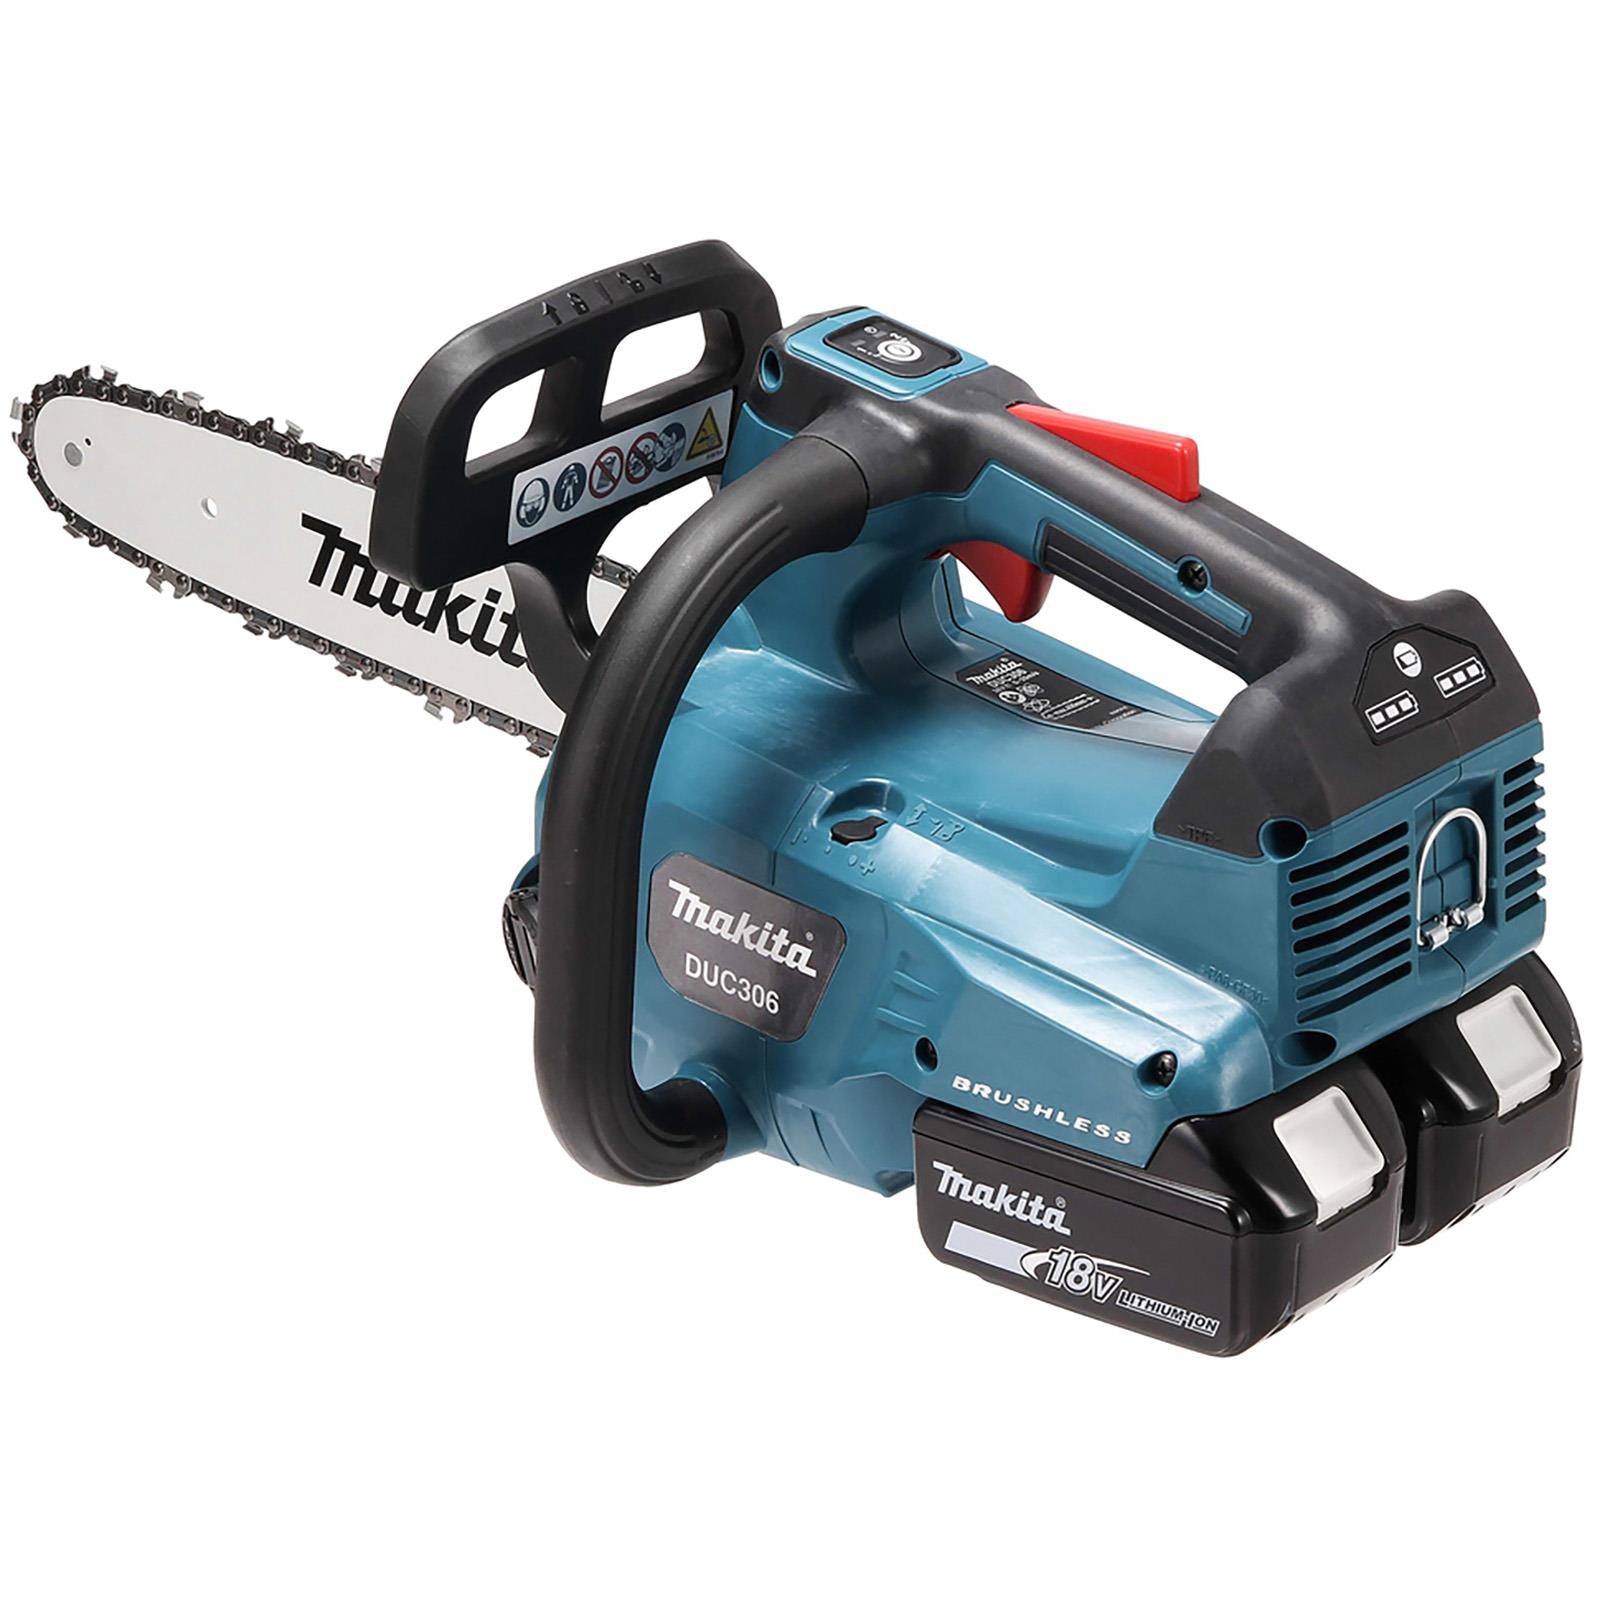 Makita Chainsaw Kit 30cm 12" 18V x 2 LXT Brushless Cordless 2 x 6Ah Battery and Dual Rapid Charger Top Handle Garden Tree Cutting Pruning DUC306PG2